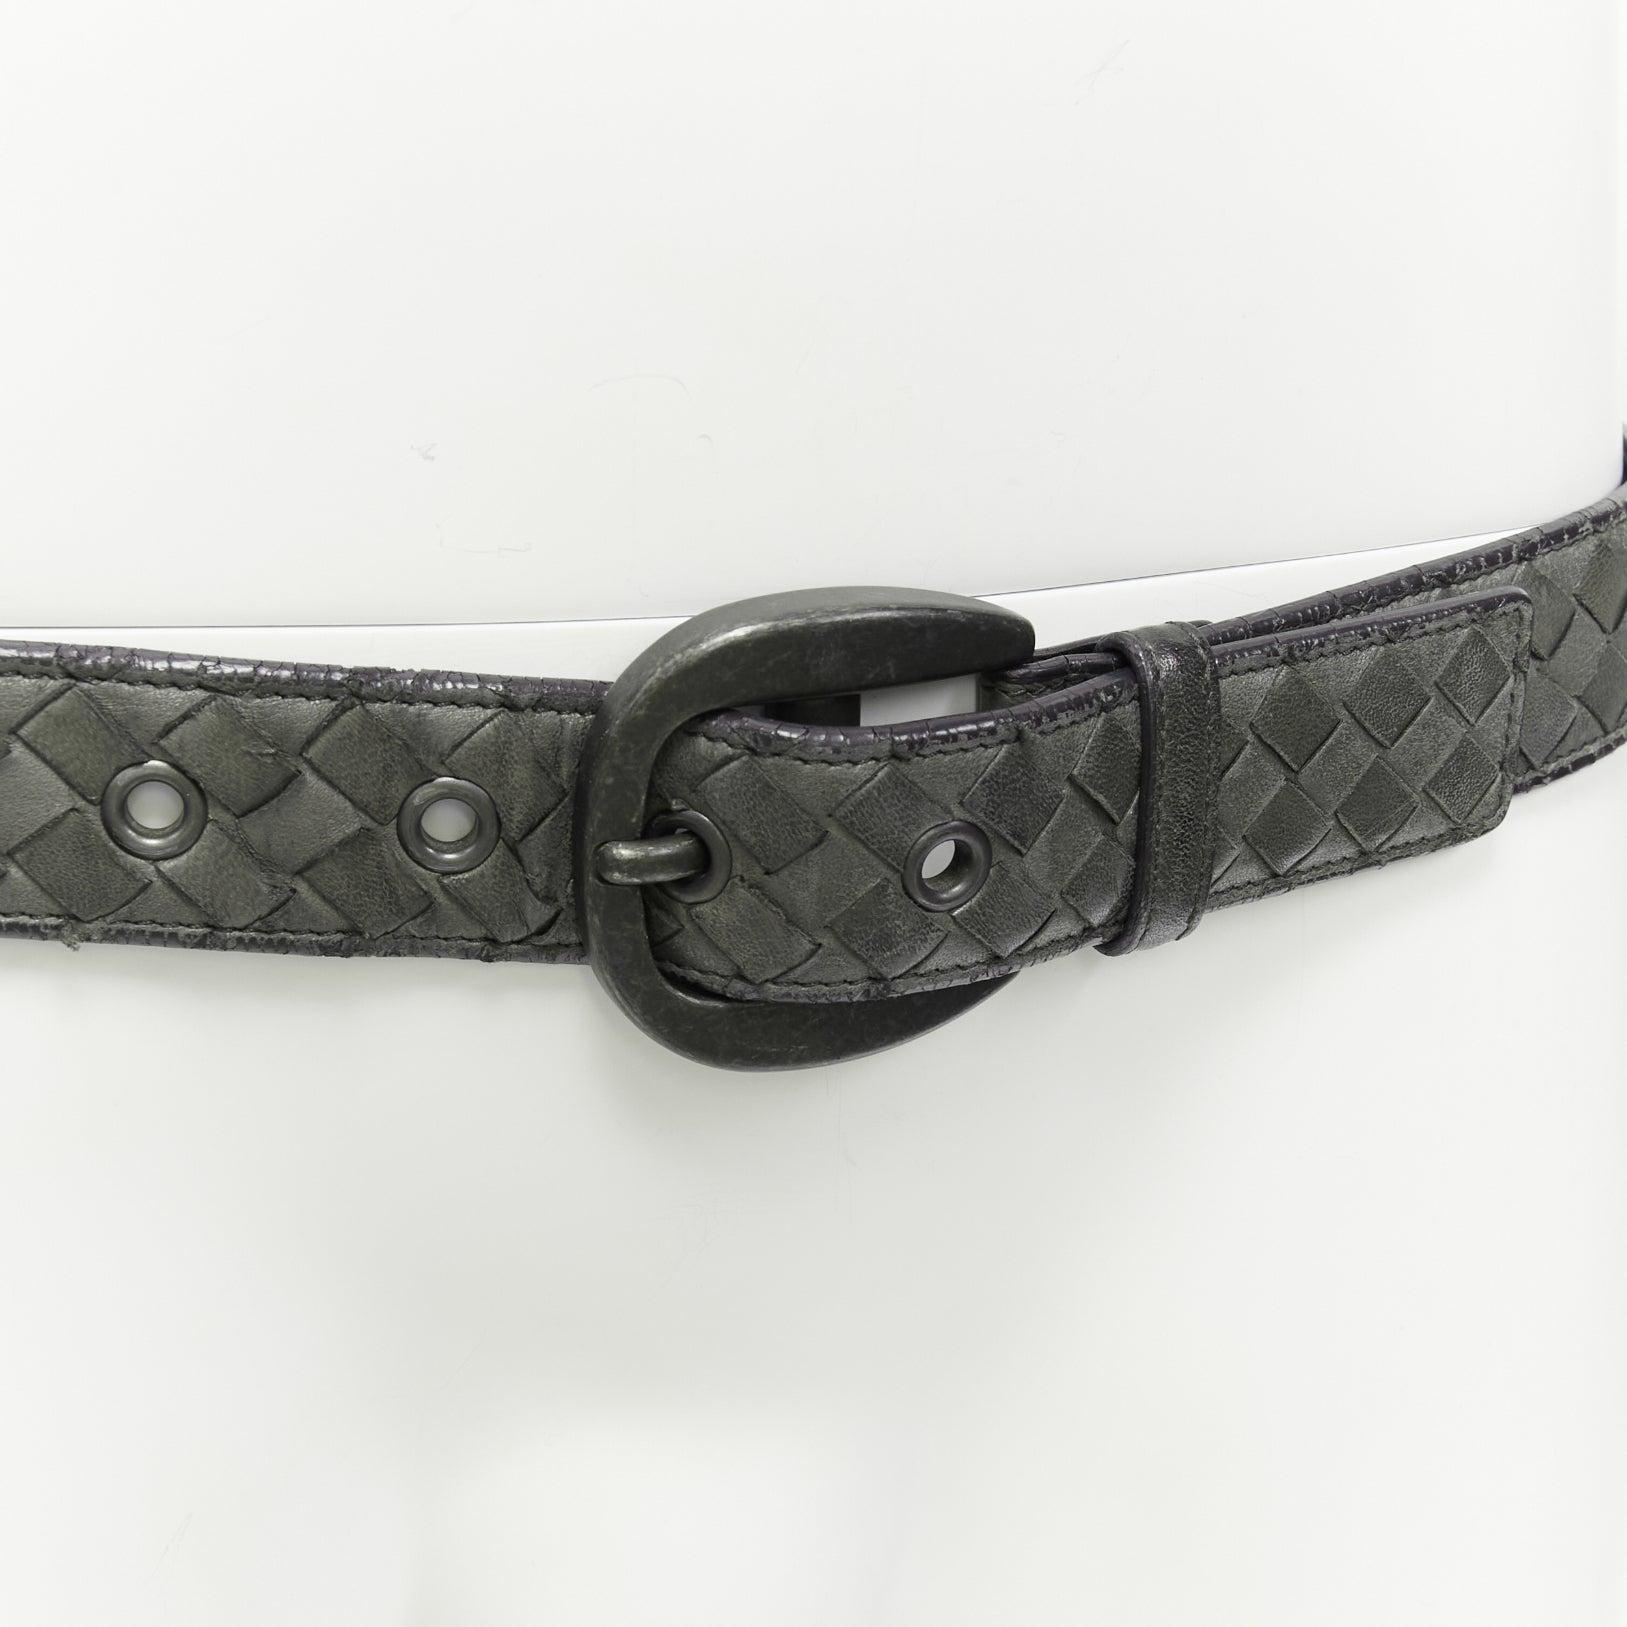 BOTTEGA VENETA grey intrecciato woven soft leather metal eyelet belt 85cm
Reference: CNLE/A00268
Brand: Bottega Veneta
Material: Leather, Metal
Color: Grey
Pattern: Solid
Closure: Belt
Lining: Black Leather
Made in: Italy

CONDITION:
Condition: